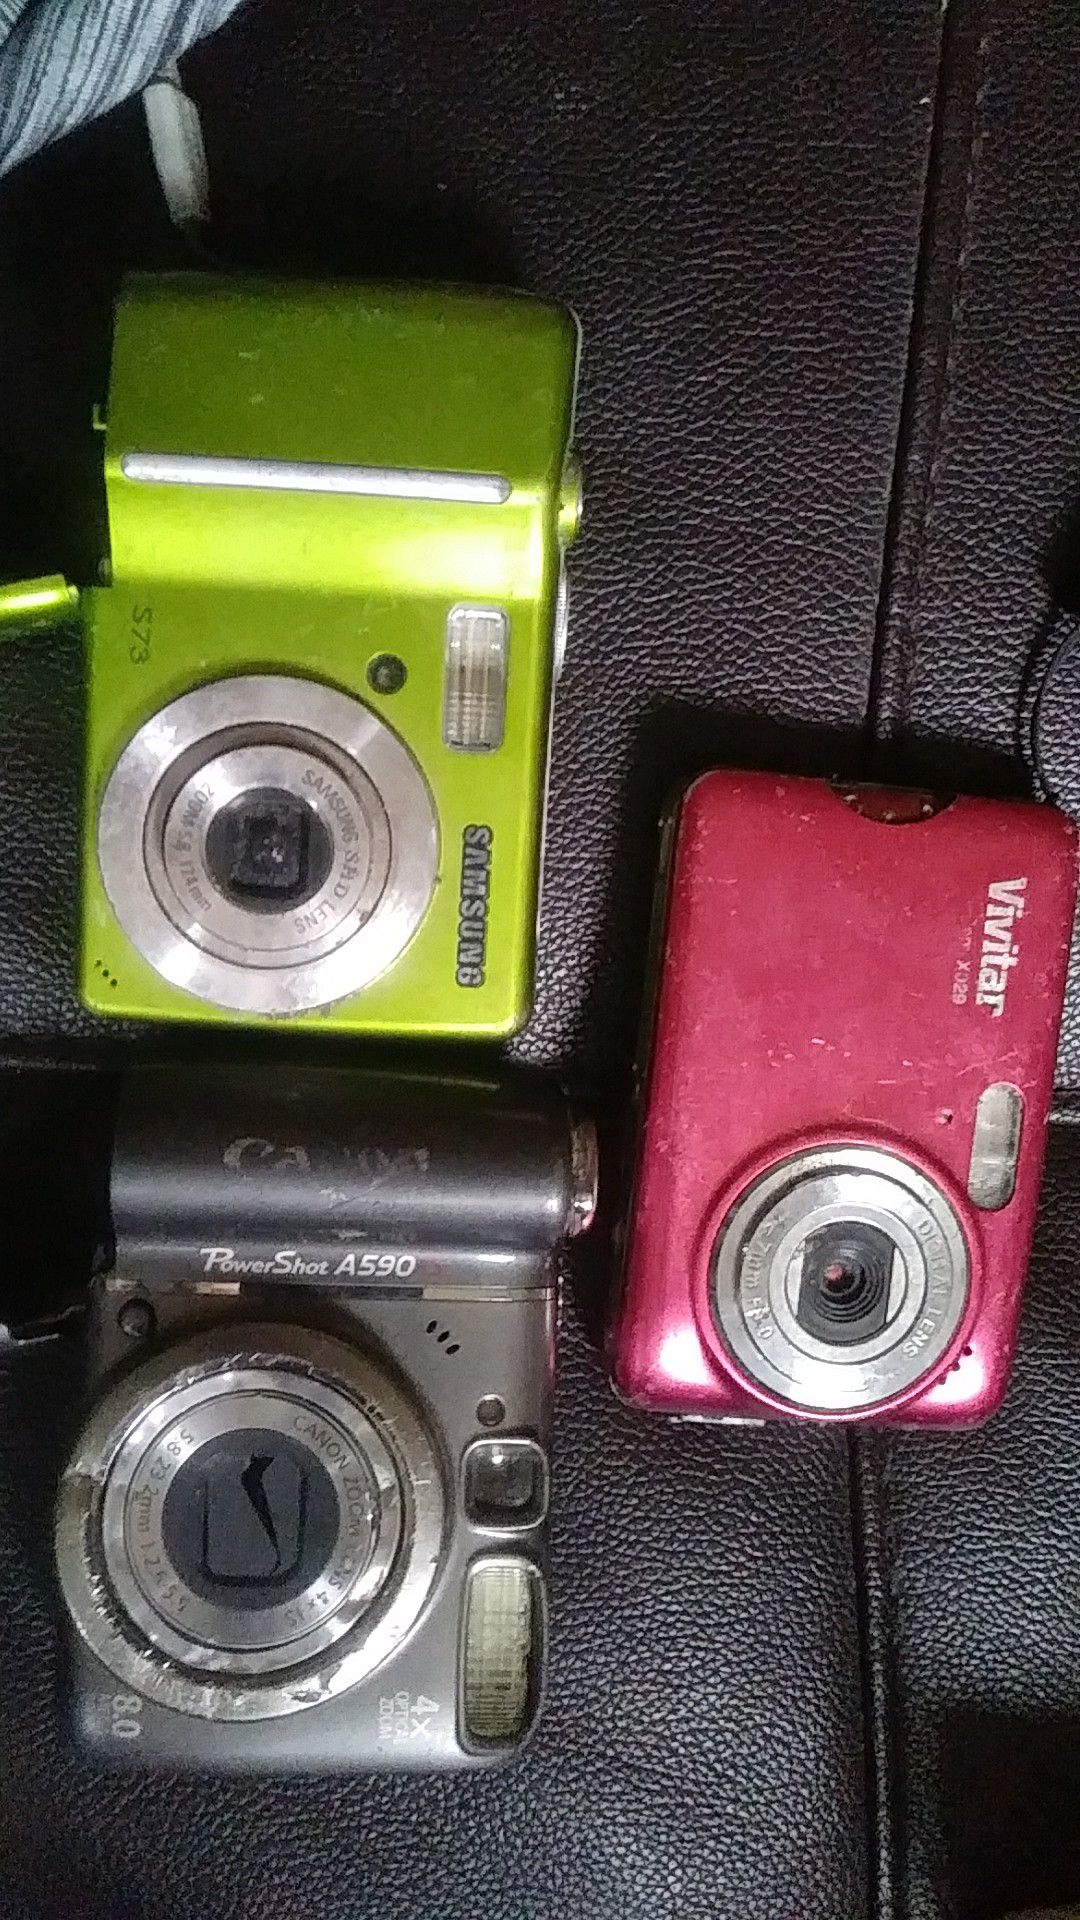 Cameras idk if they work